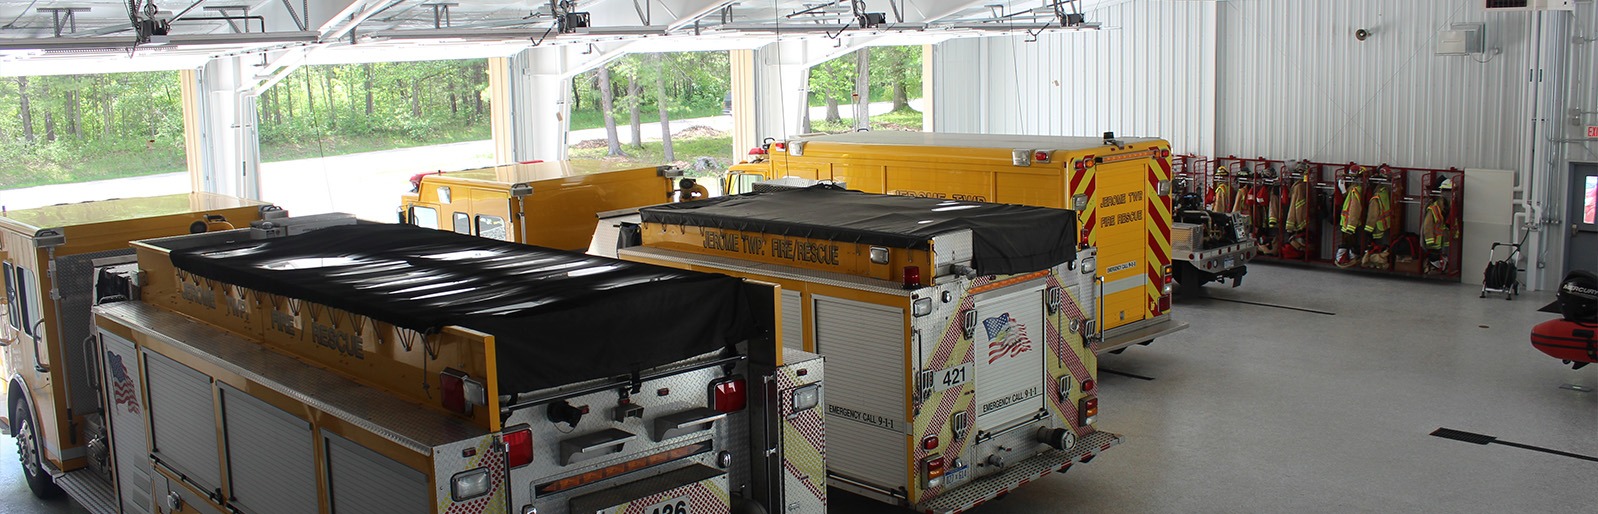 Fire rescue vehicles stationed inside the Jerome Township Fire Department.